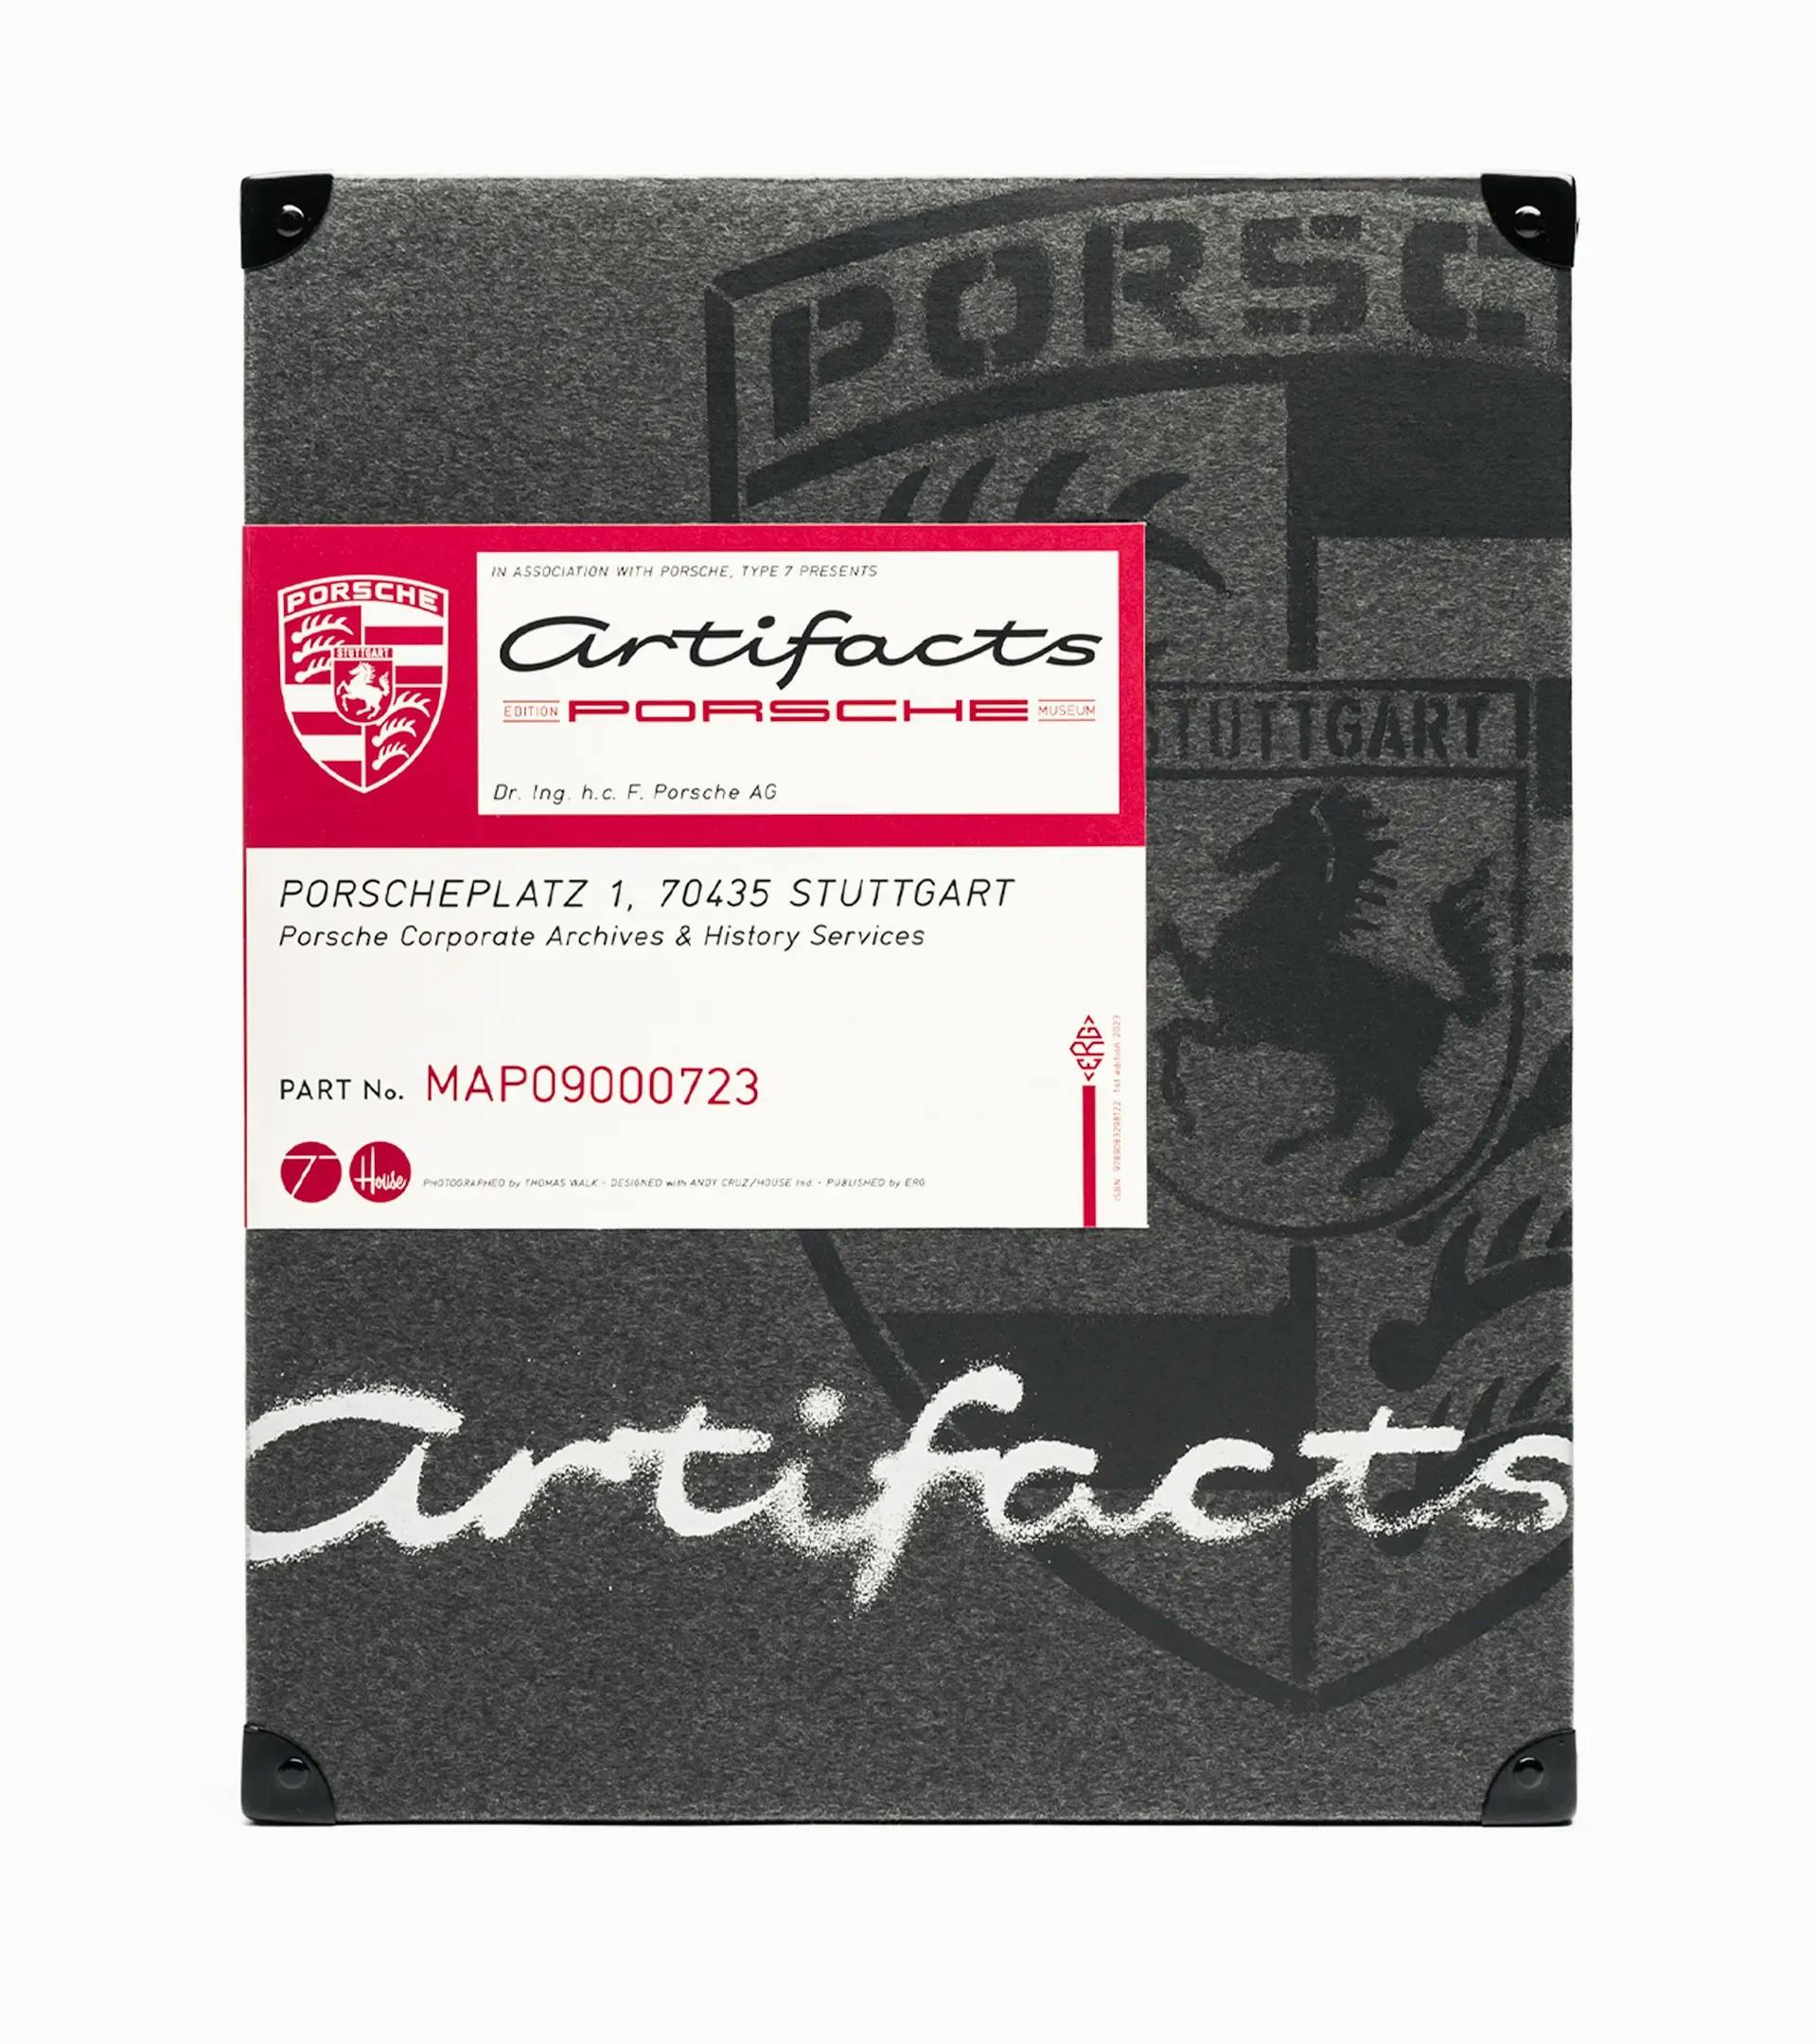  'Artifacts' book